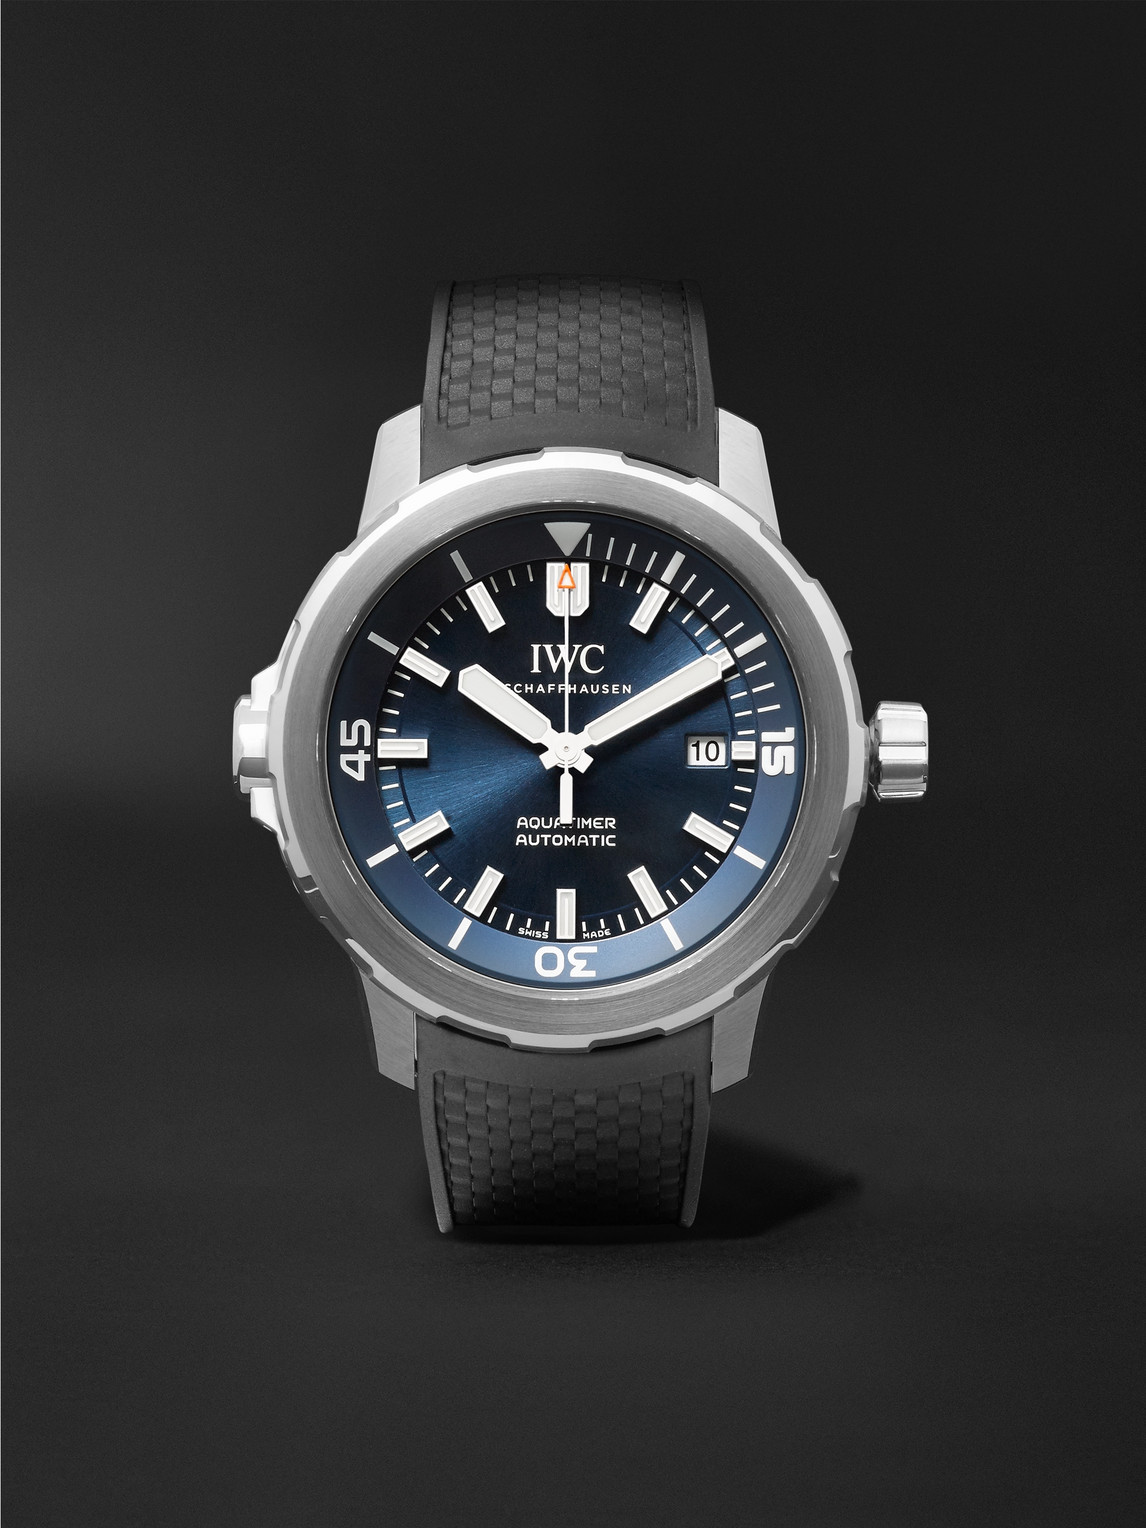 Aquatimer Expedition Jacques-Yves Cousteau Automatic 42mm Stainless Steel and Rubber Watch, Ref. No. IW329005